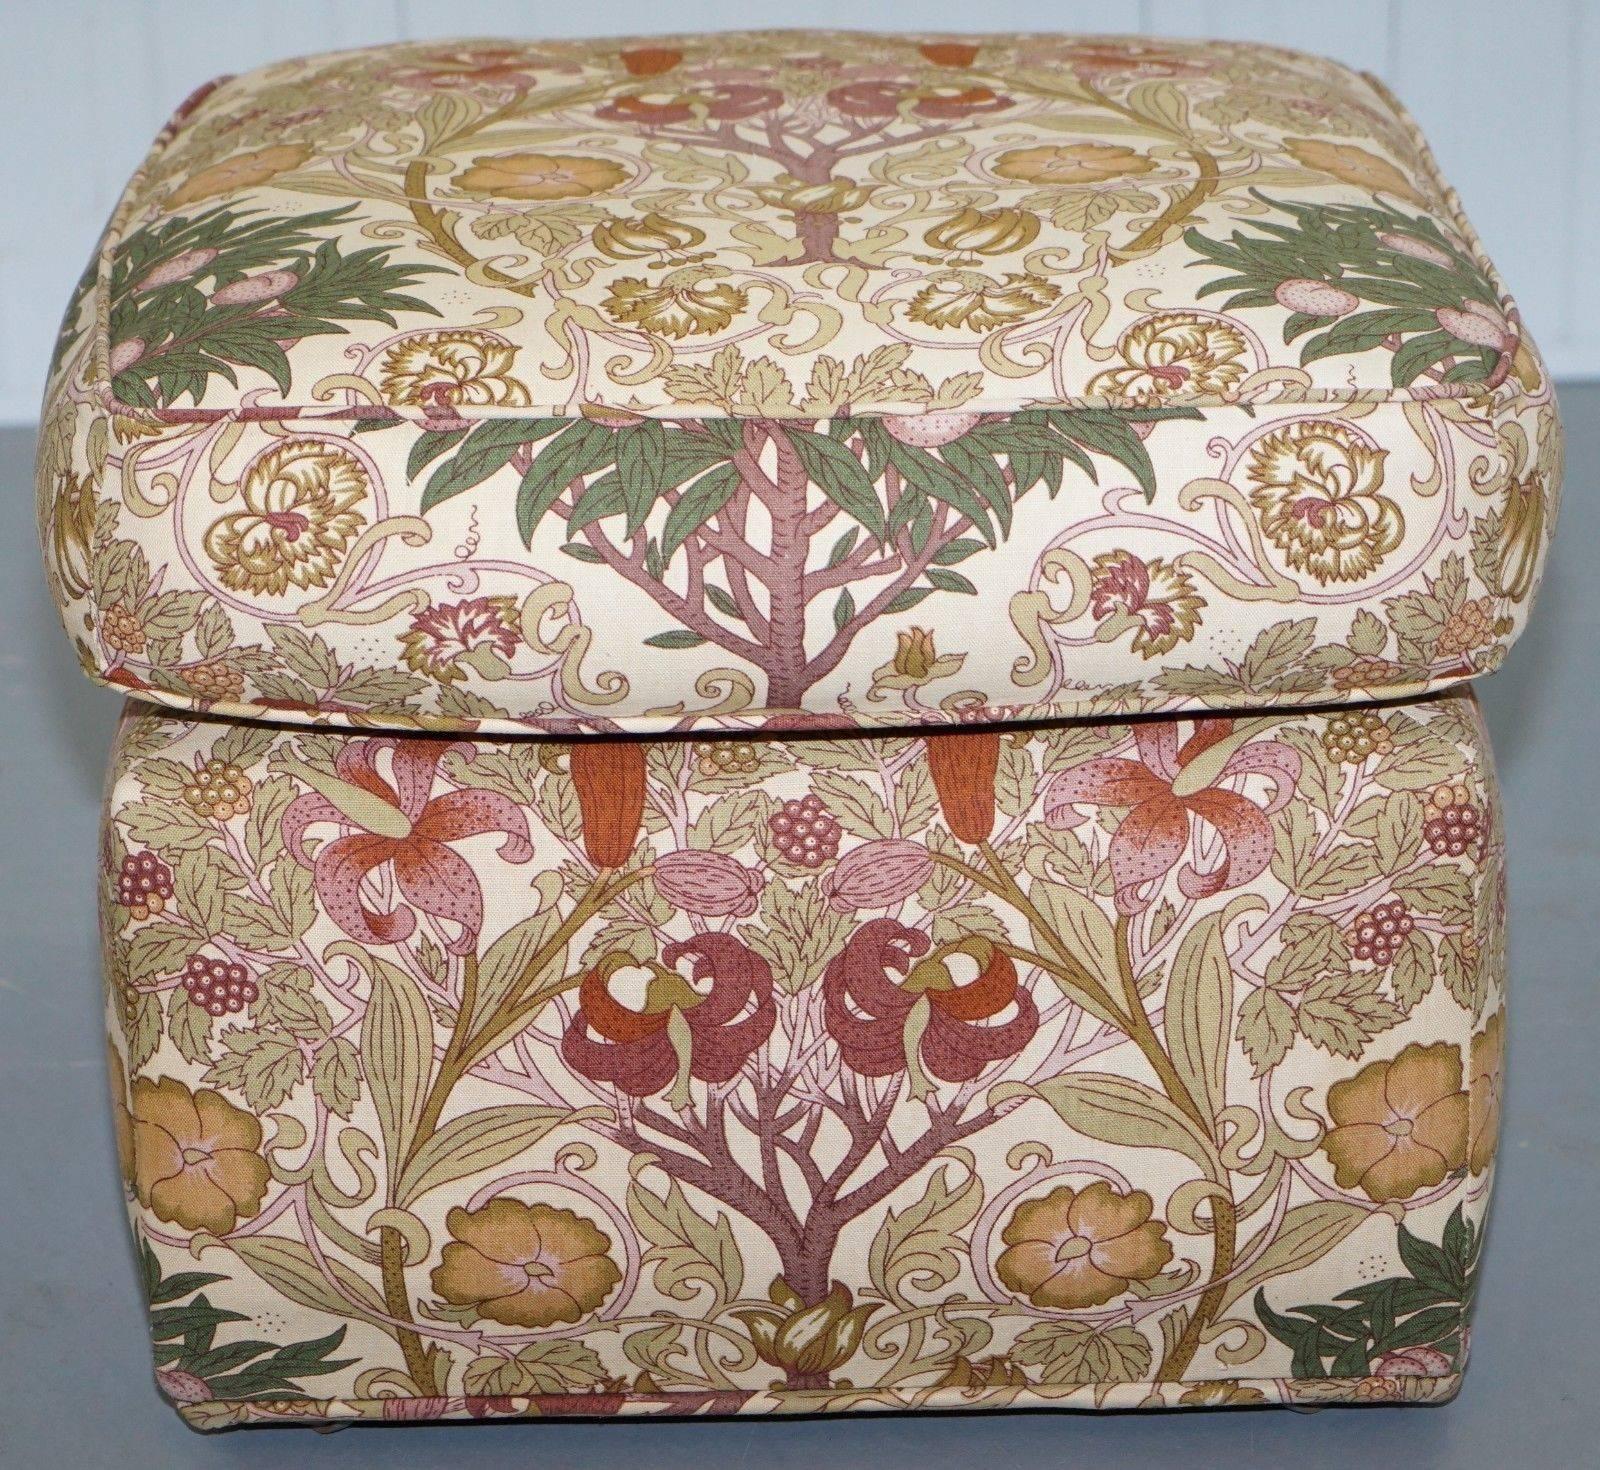 British Liberty's London Floral Upholstered Footstool Ottoman Kendrick Part of a Suite